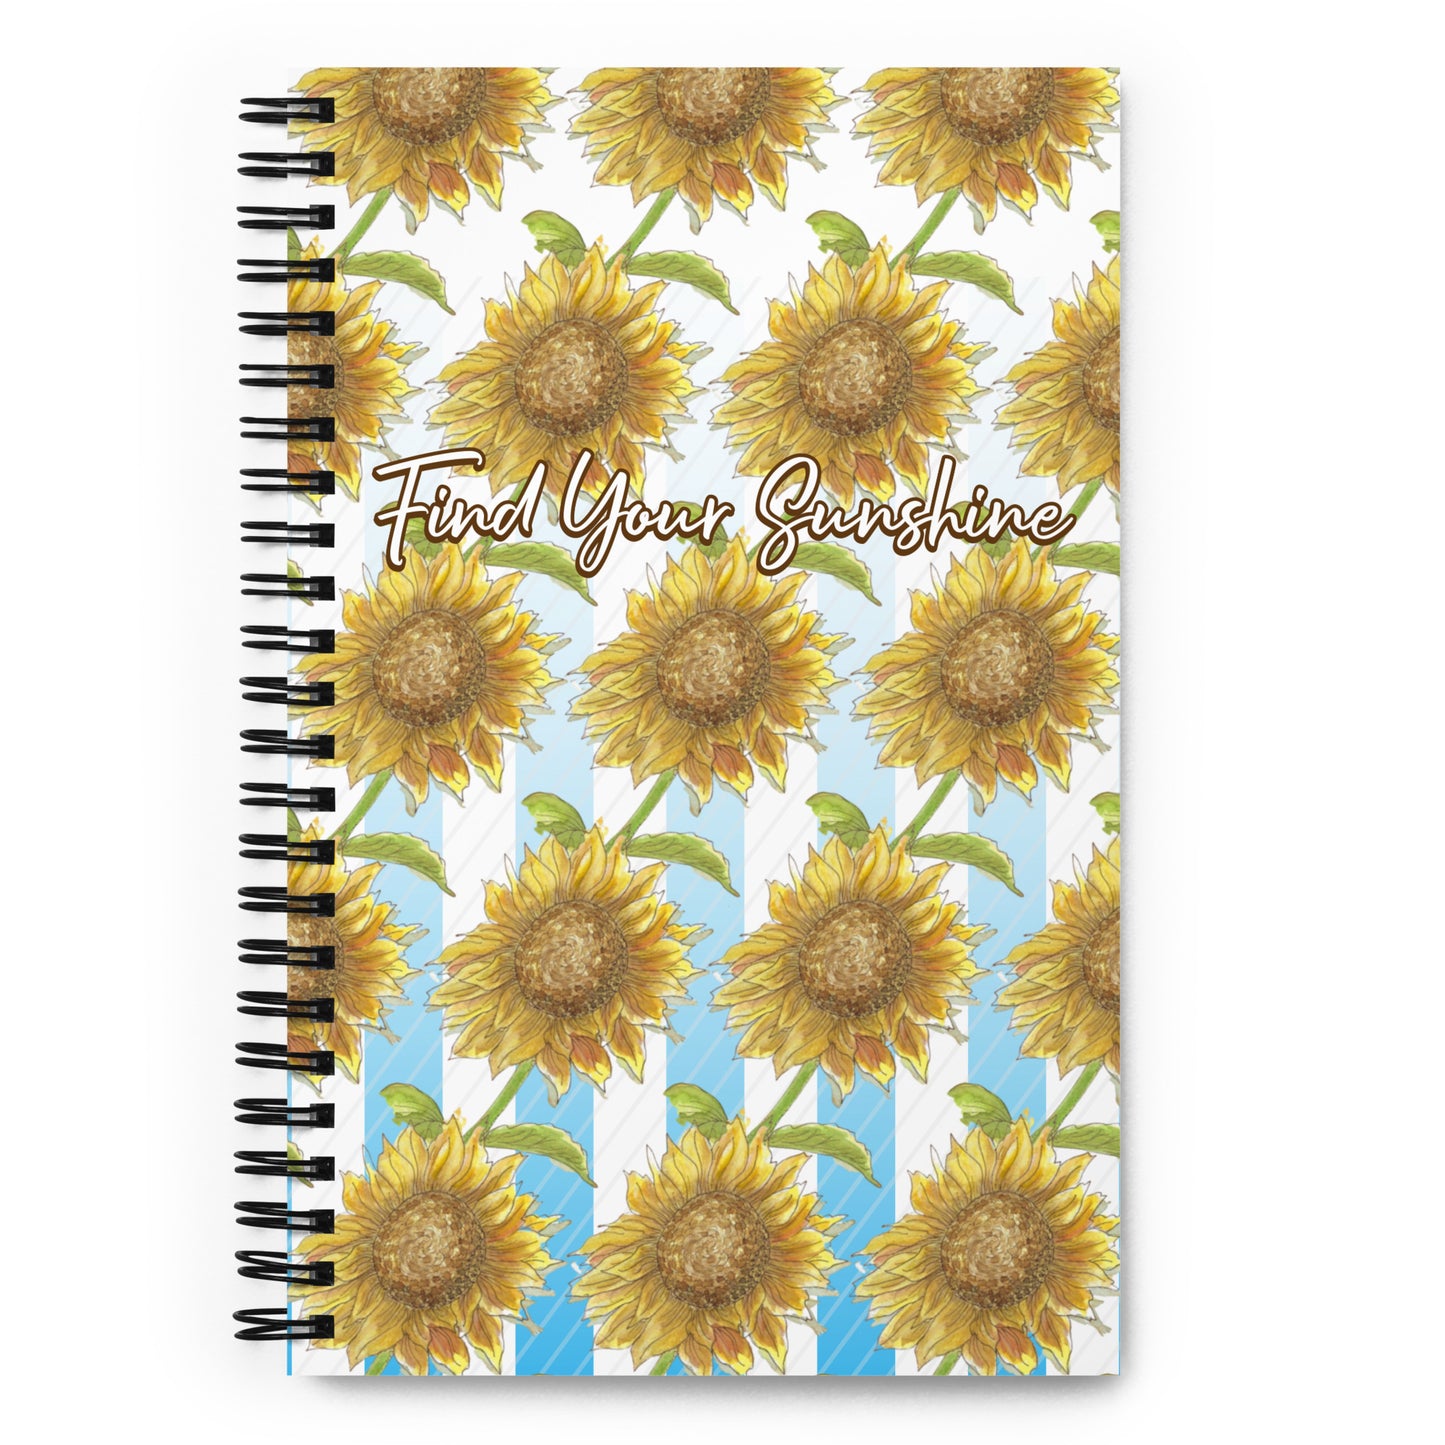 Spiral bound notebook with soft touch cover and 140 dotted pages. Cover features a pattern of watercolor sunflowers and blue and white stripes. Front has inspirational phrase "find your sunshine." Measures 5.5 inches by 8.5 inches.